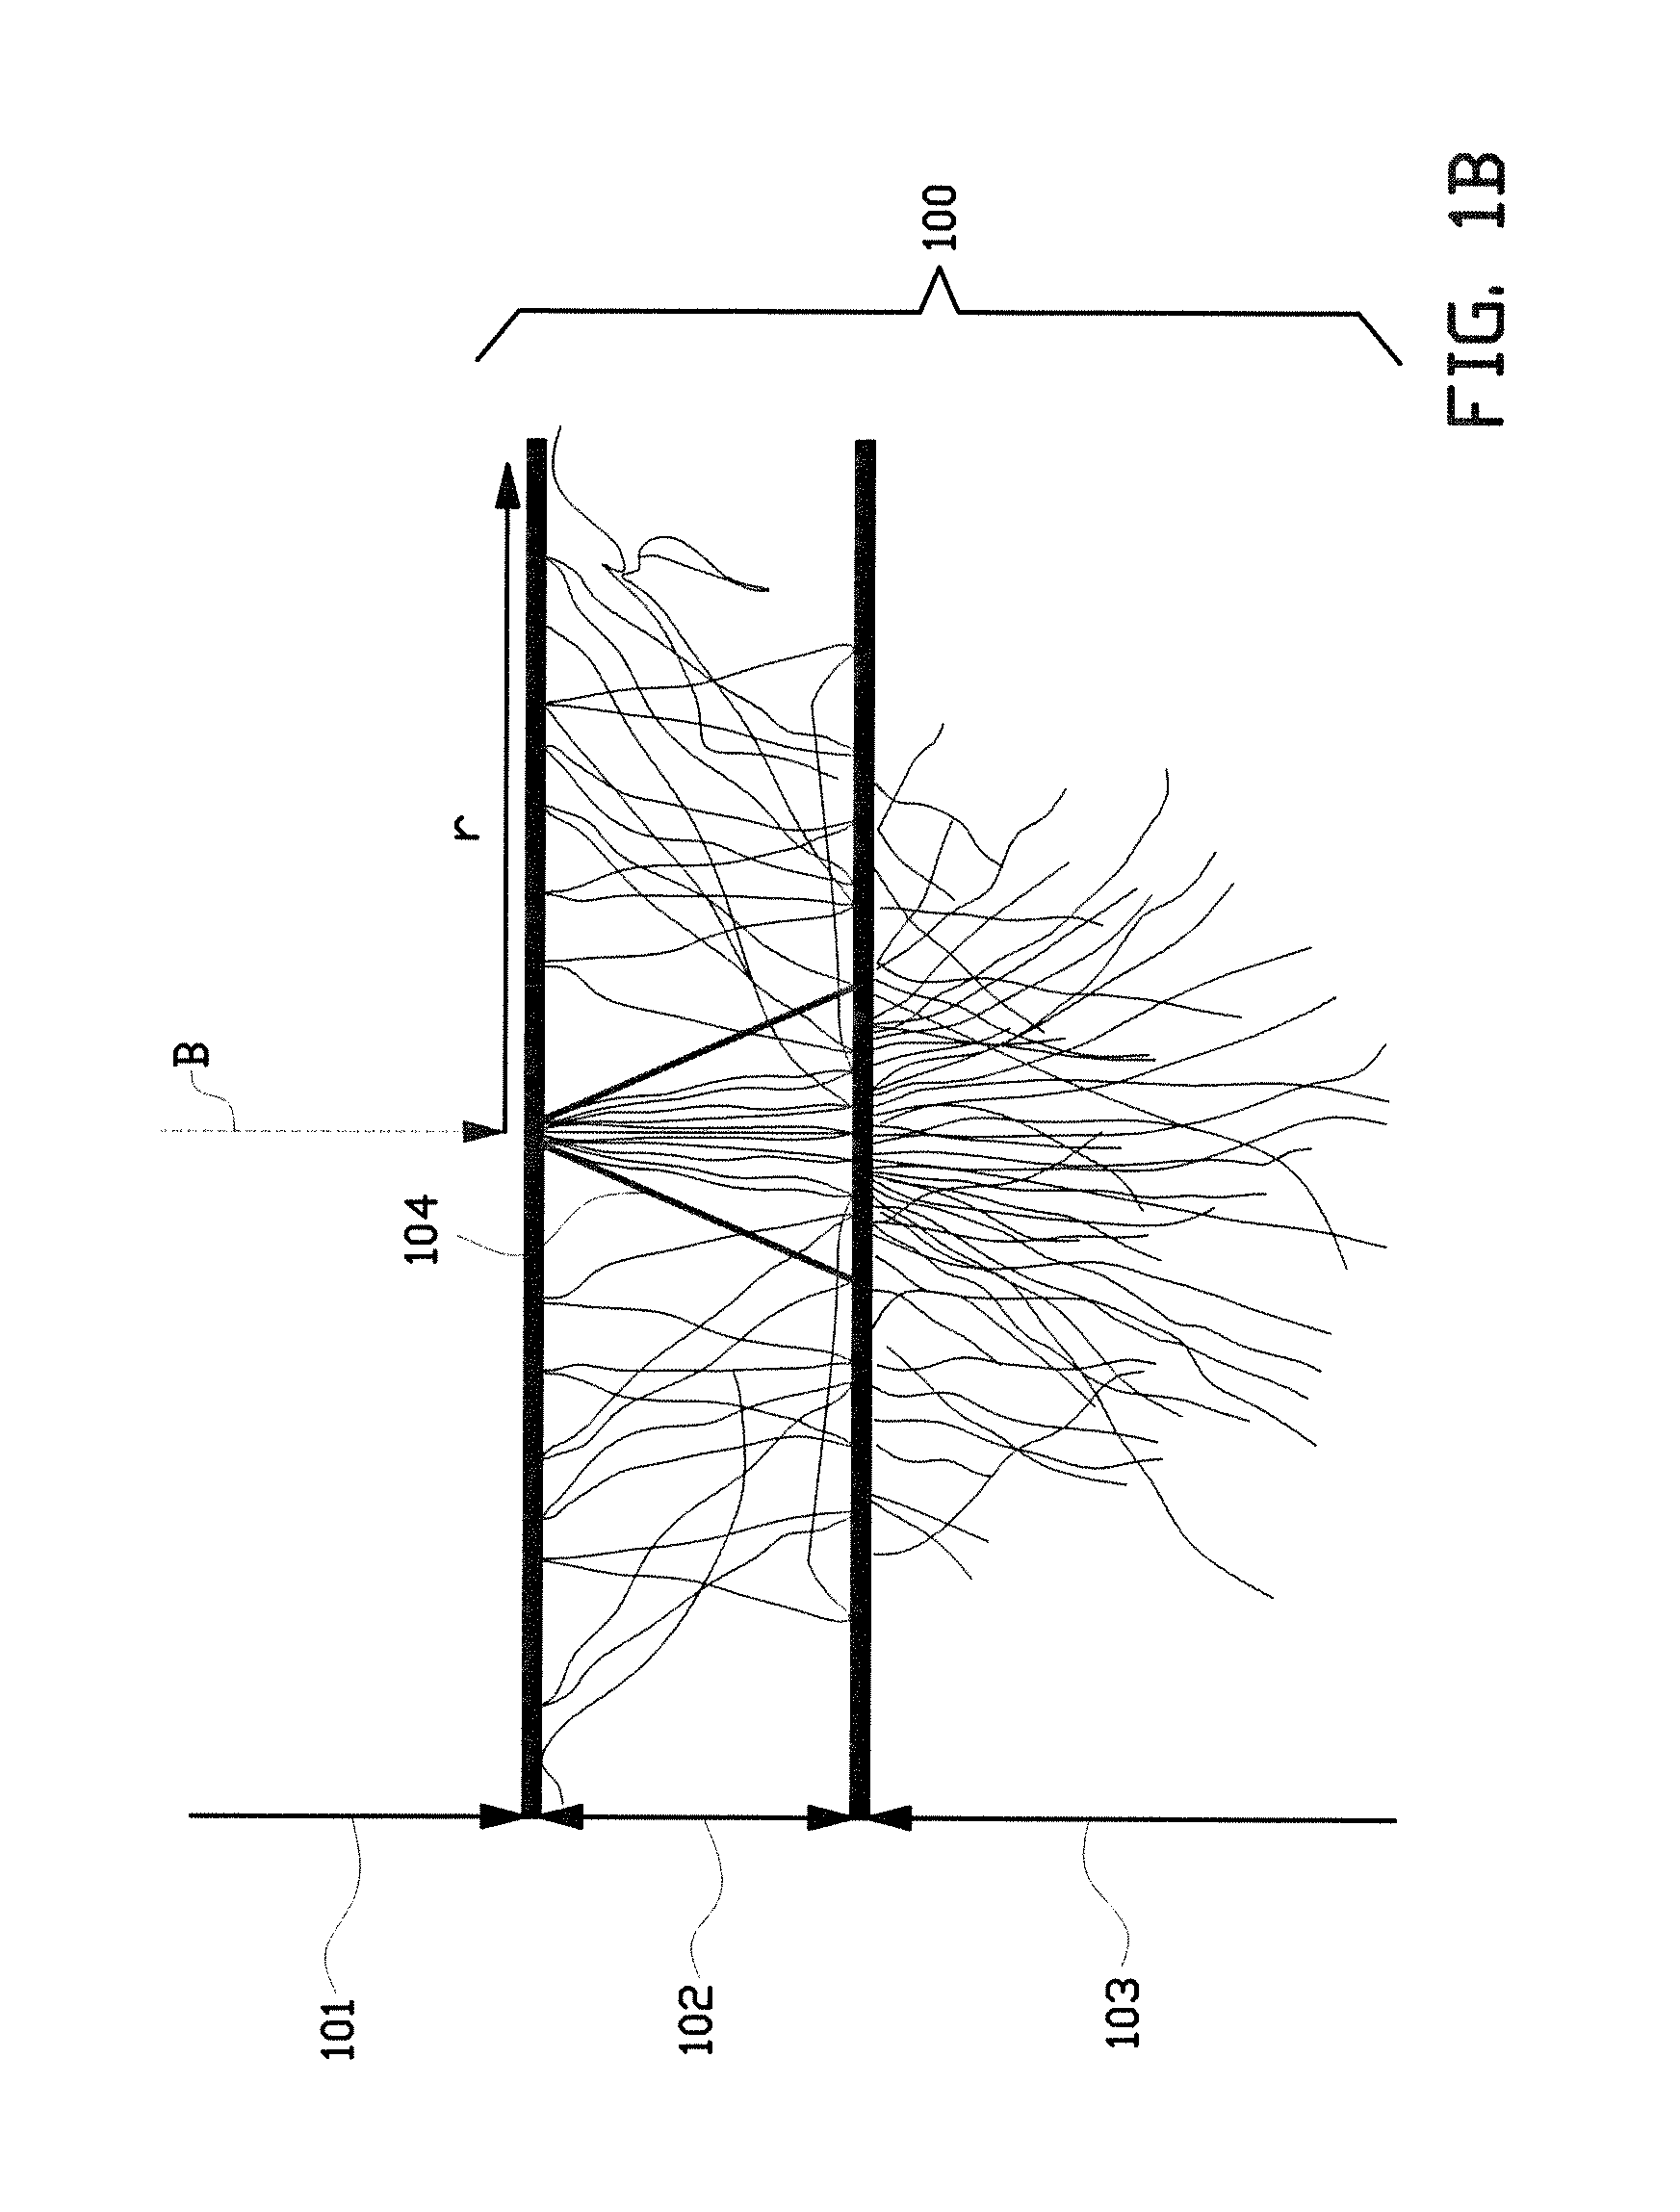 Proximity effect correction in a charged particle lithography system